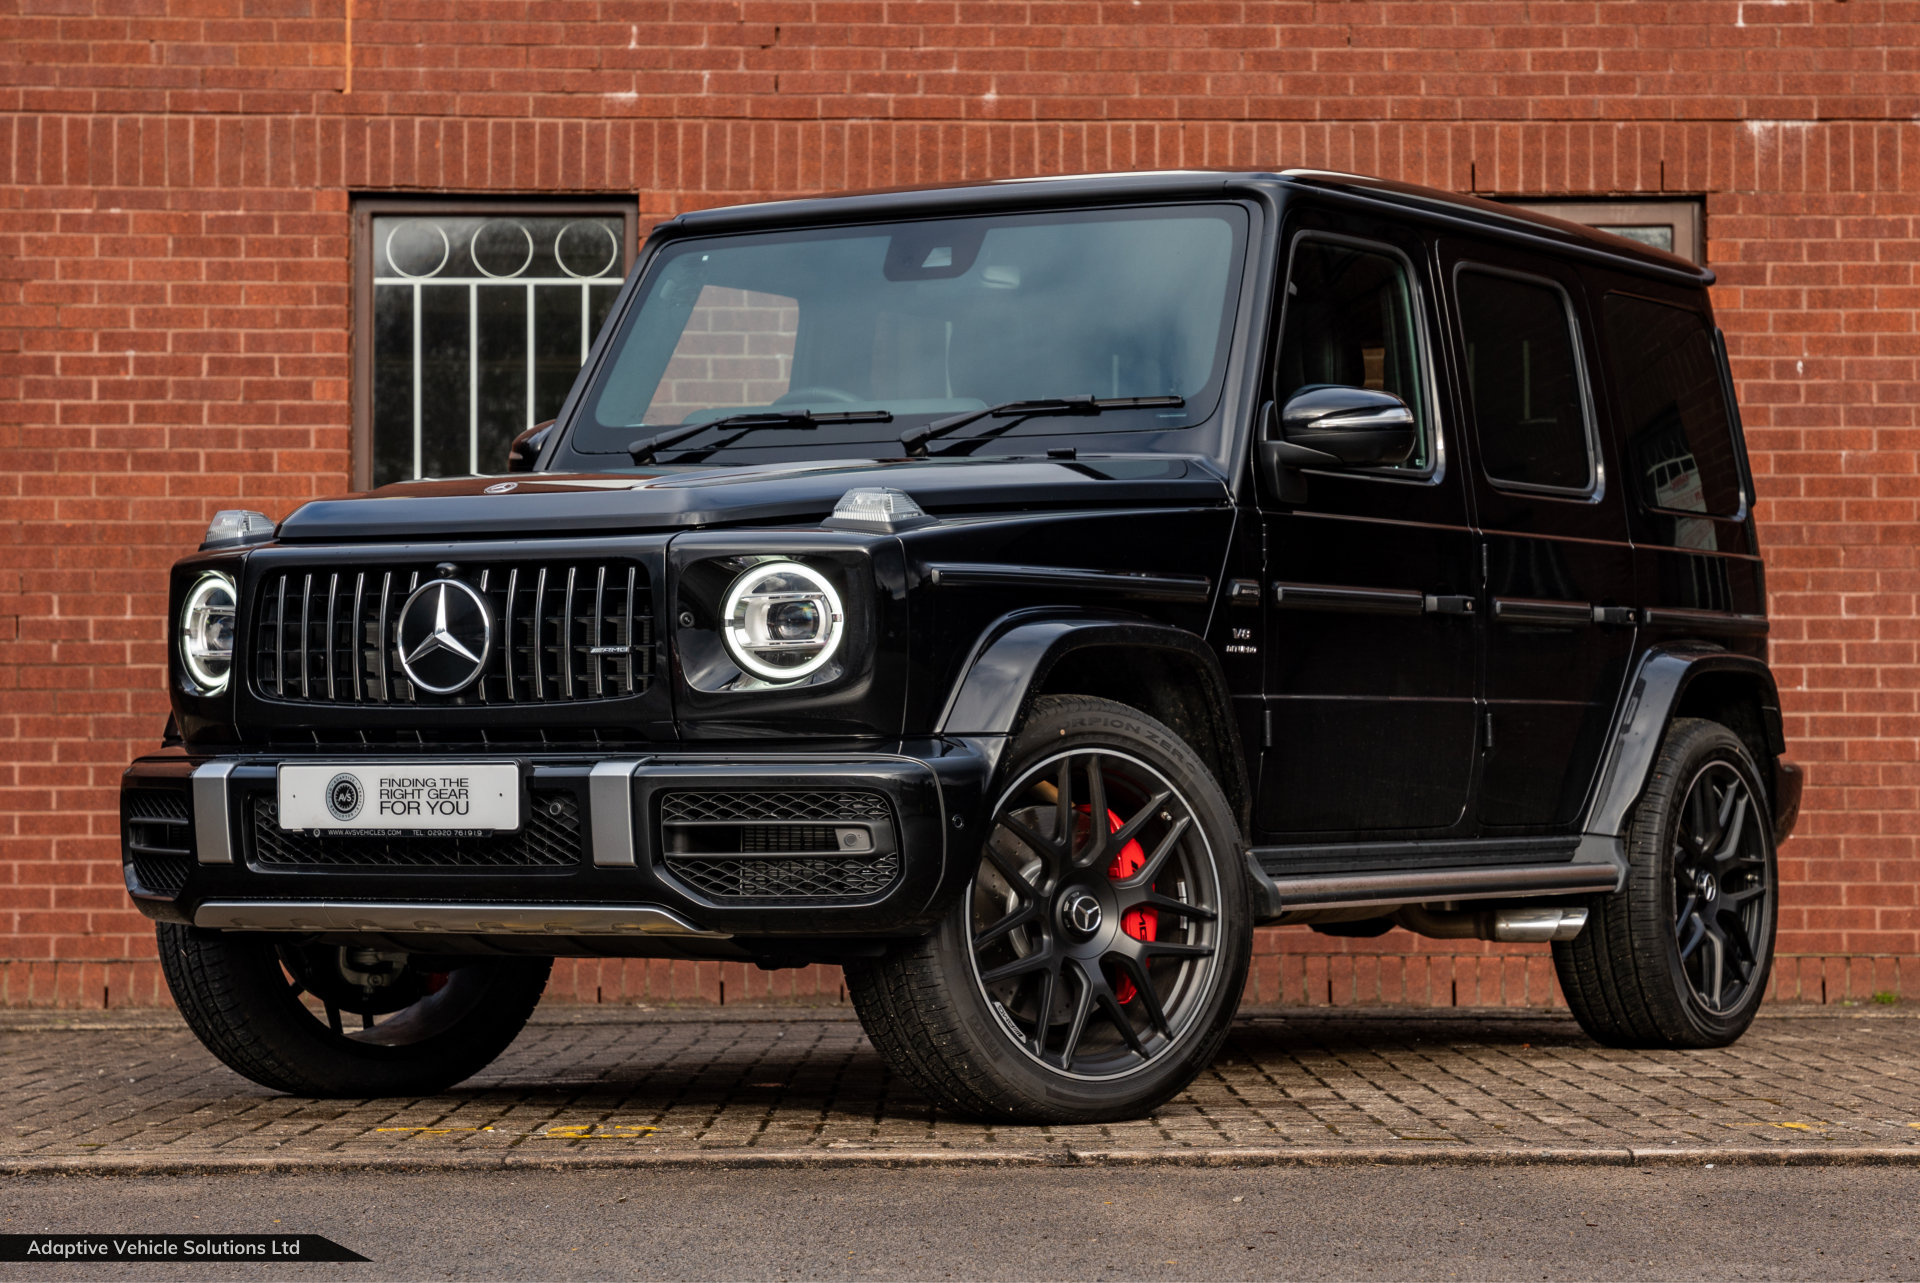 2021 Mercedes Benz G63 AMG Black near side front view